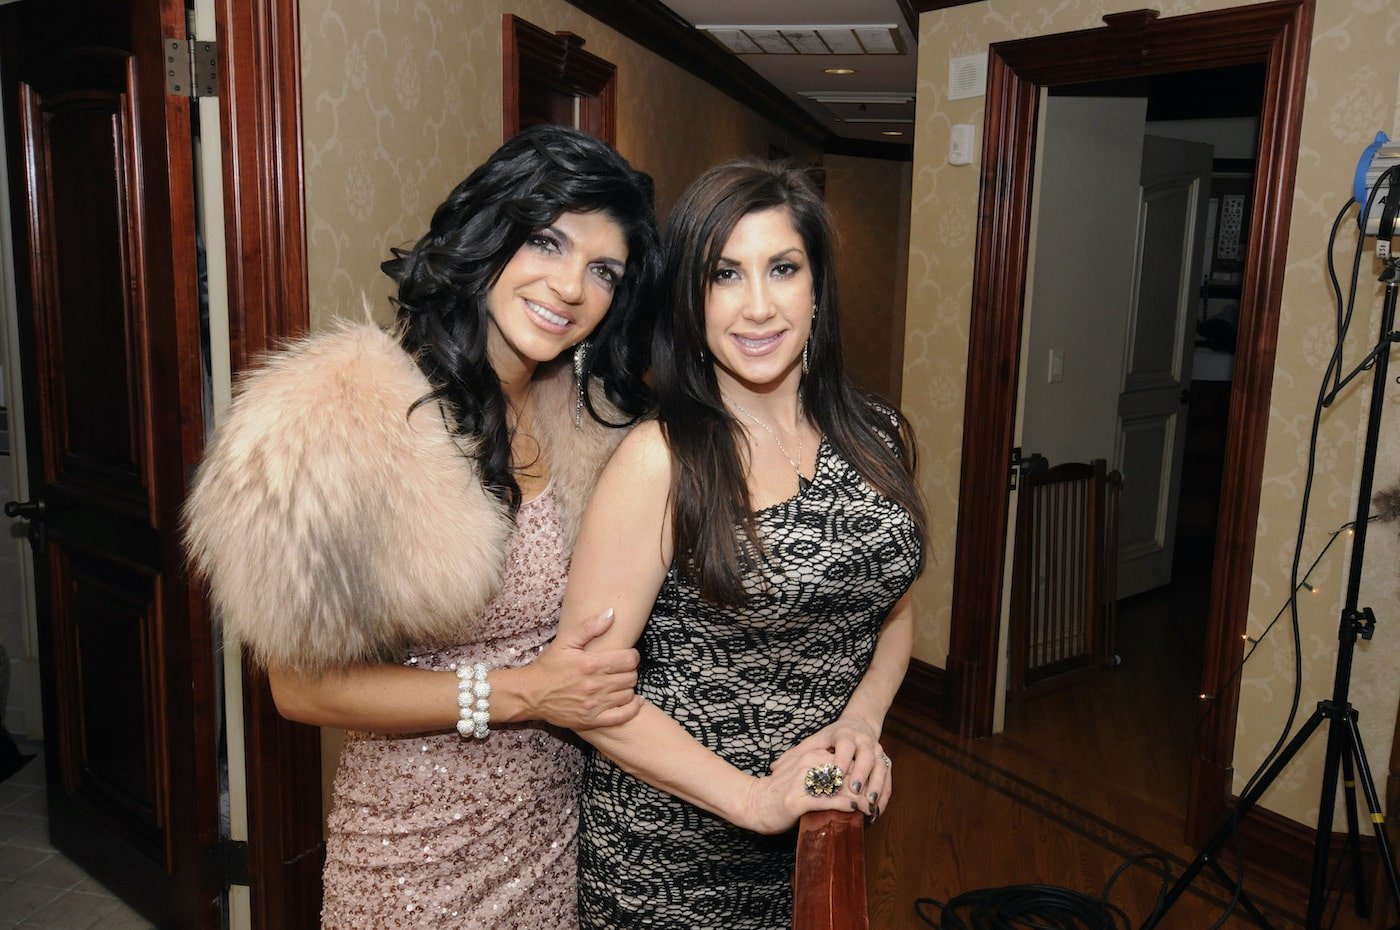 Teresa Giudice and Jacqueline Laurita from 'RHONJ' pose for a photo